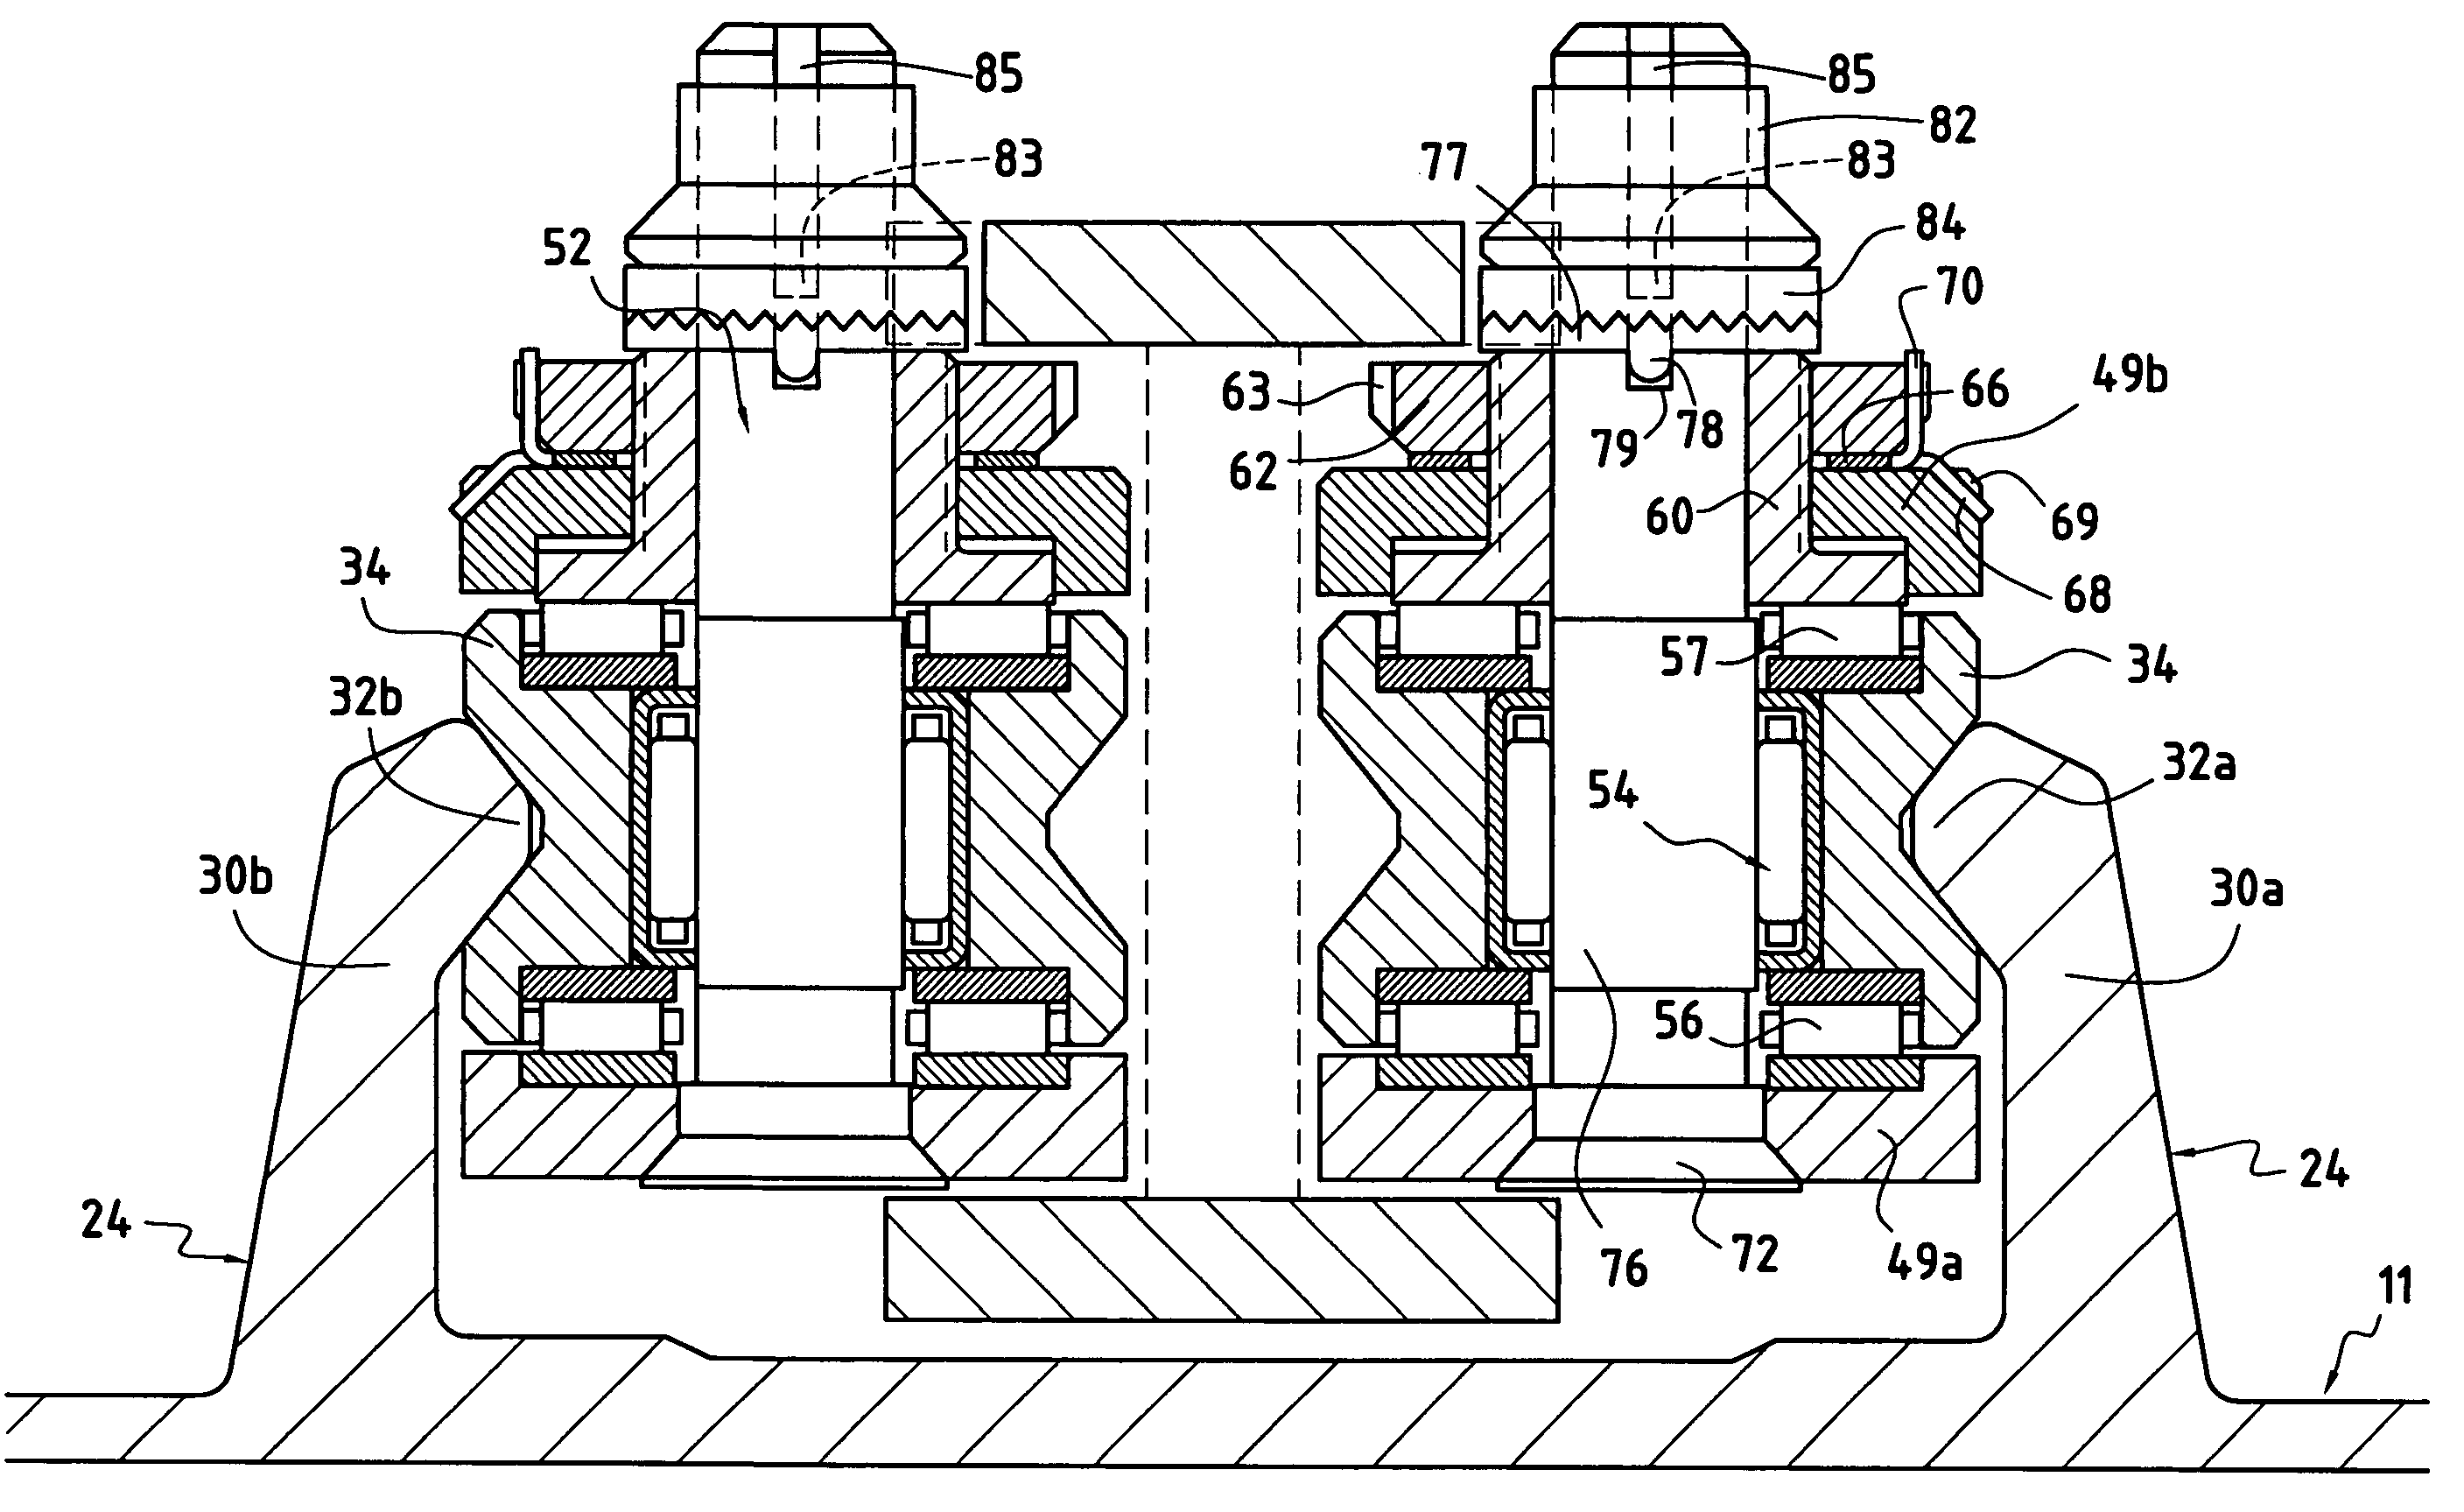 Stator vane stage actuated by an automatically-centering rotary actuator ring